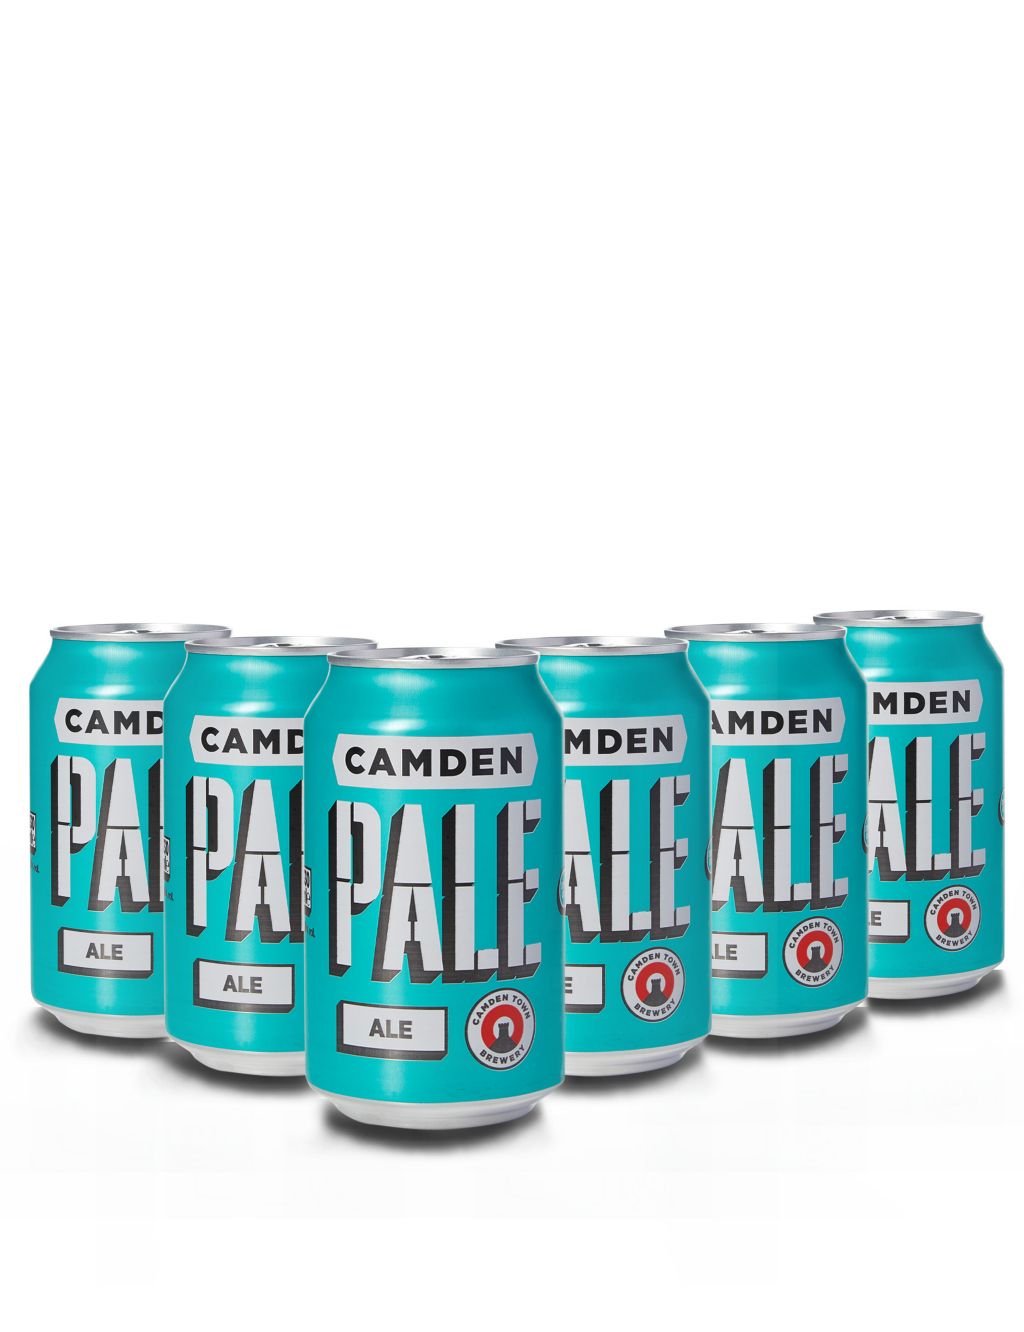 Camden Town Pale Ale - Case of 24 cans